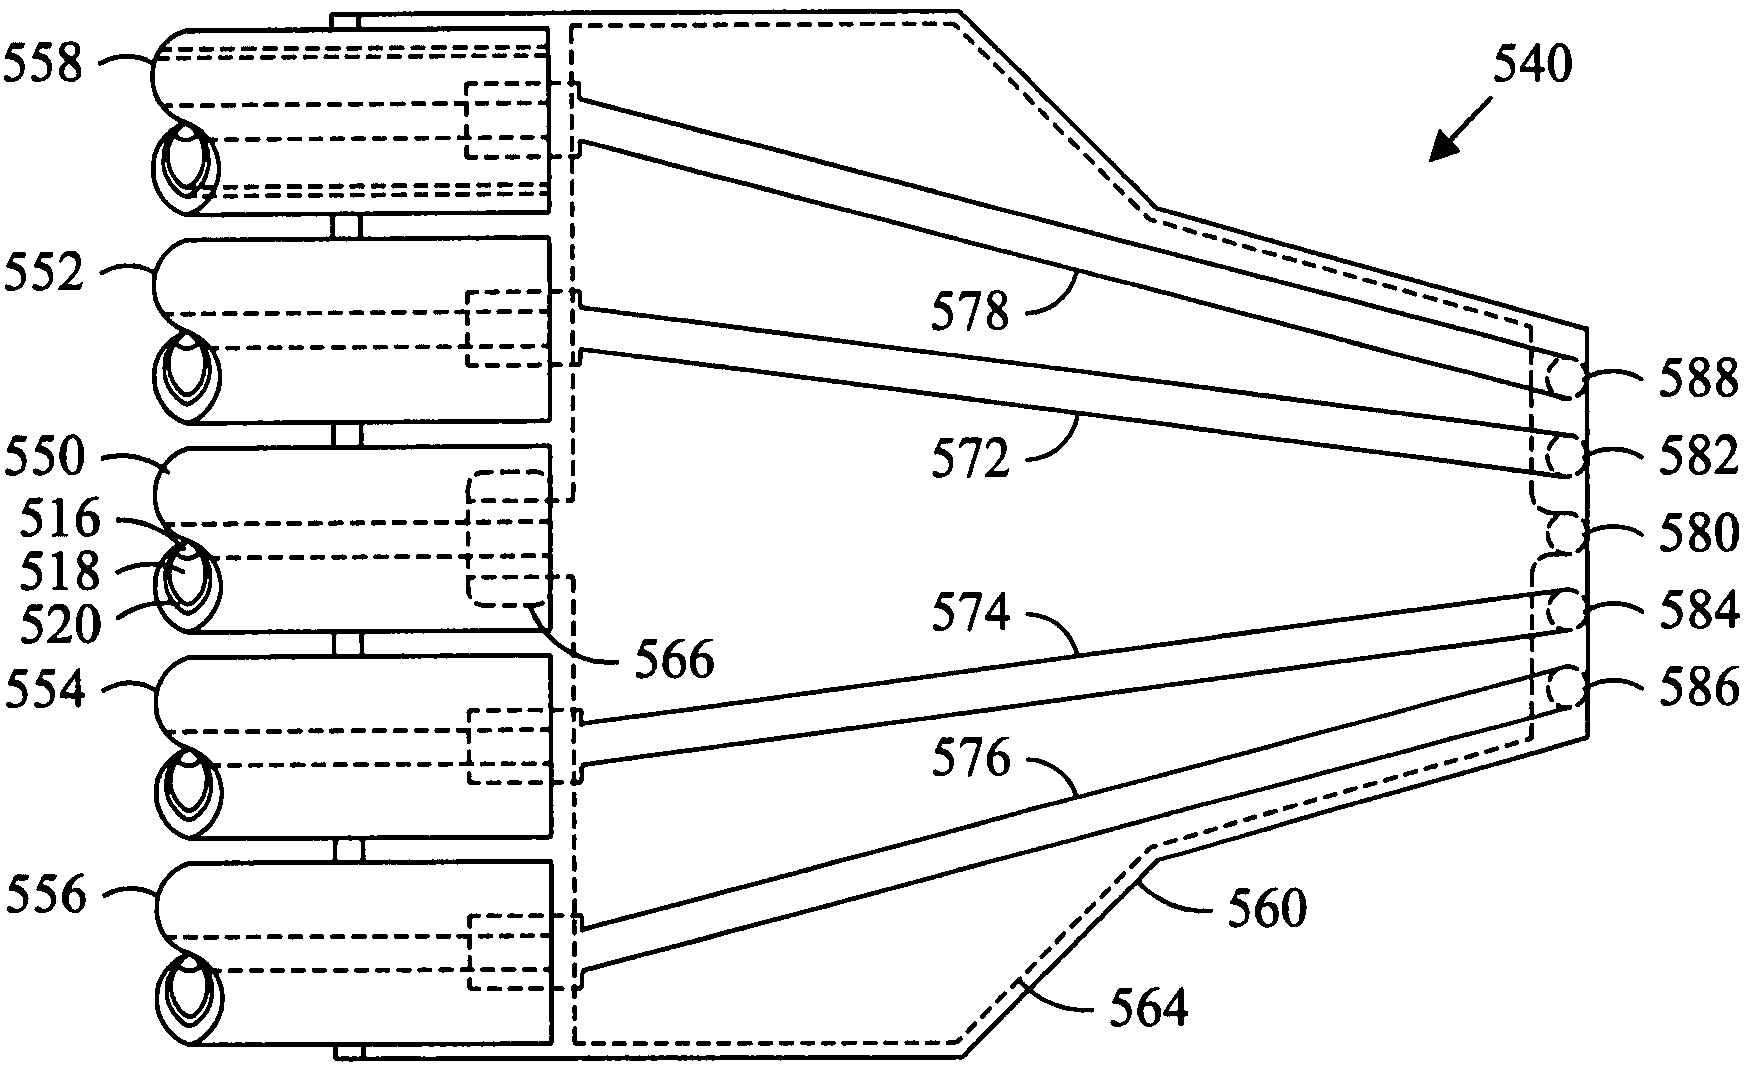 Differential signal probing system